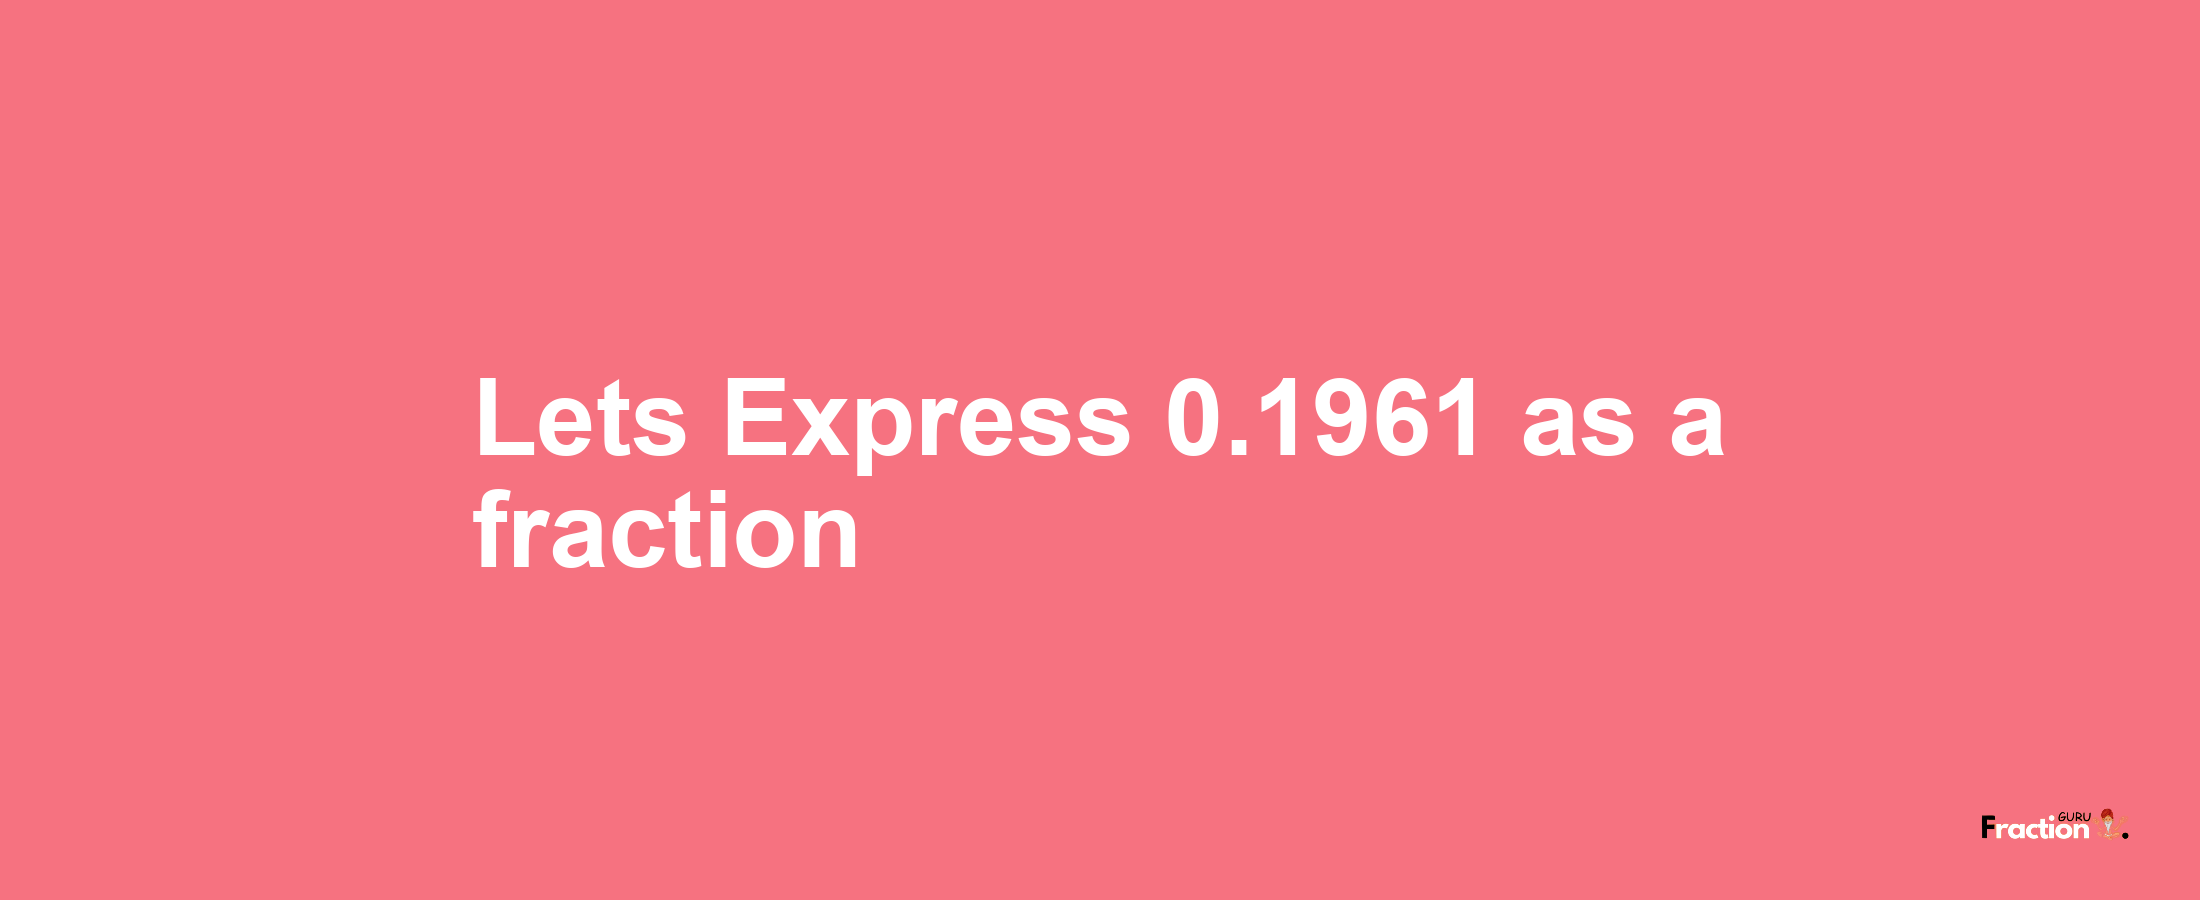 Lets Express 0.1961 as afraction